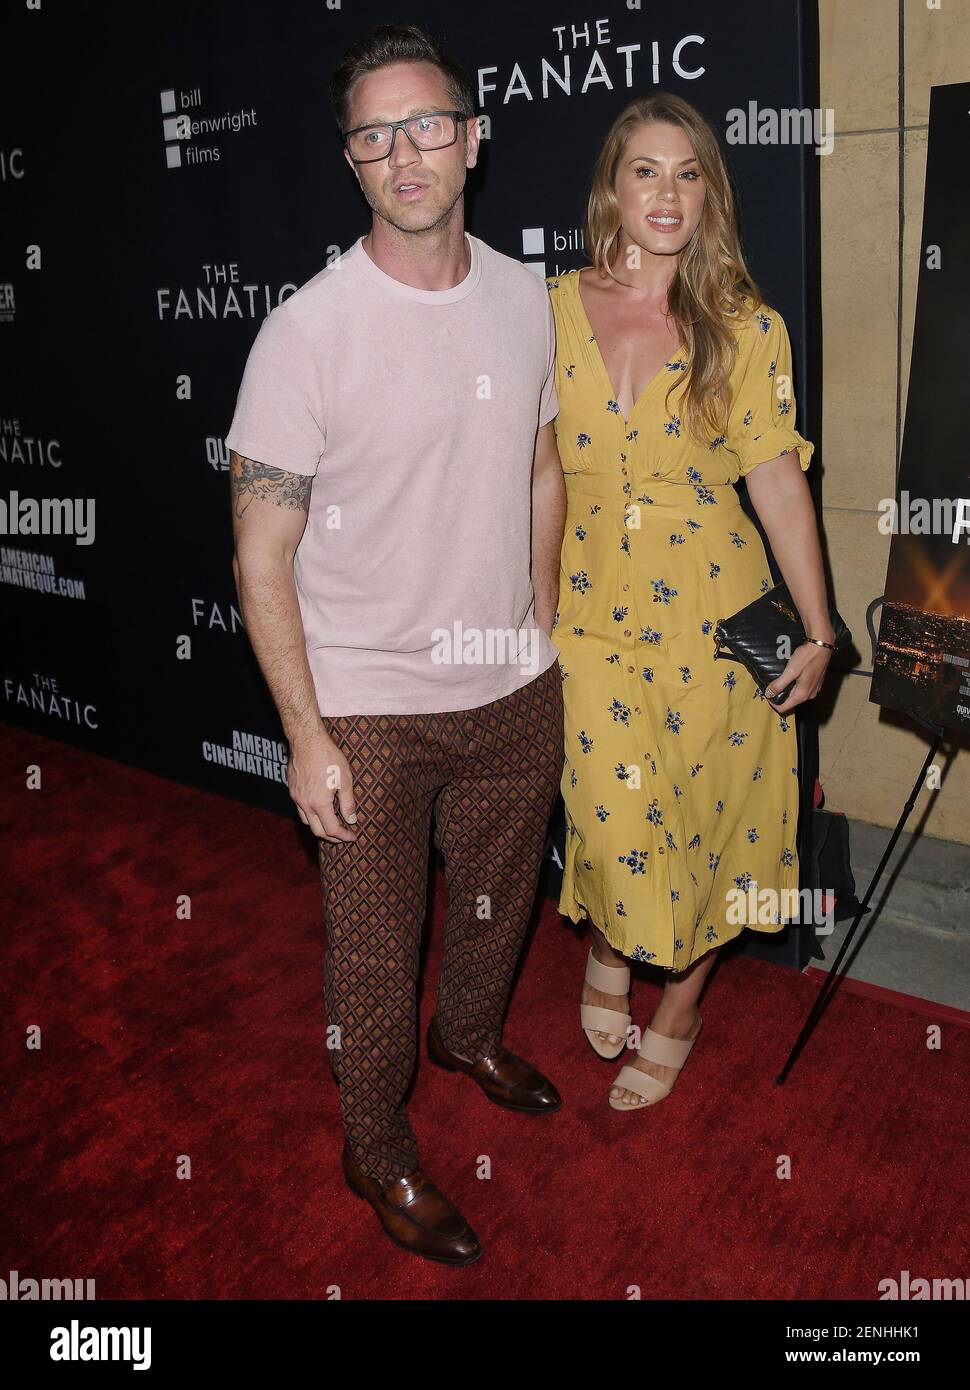 L-R) Devon Sawa and Dawni Sahanovitch at THE FANATIC Los Angeles Premiere  held at the Egyptian Theatre in Hollywood, CA on Thursday, August 22, 2019.  (Photo By Sthanlee B. Mirador/Sipa USA Stock